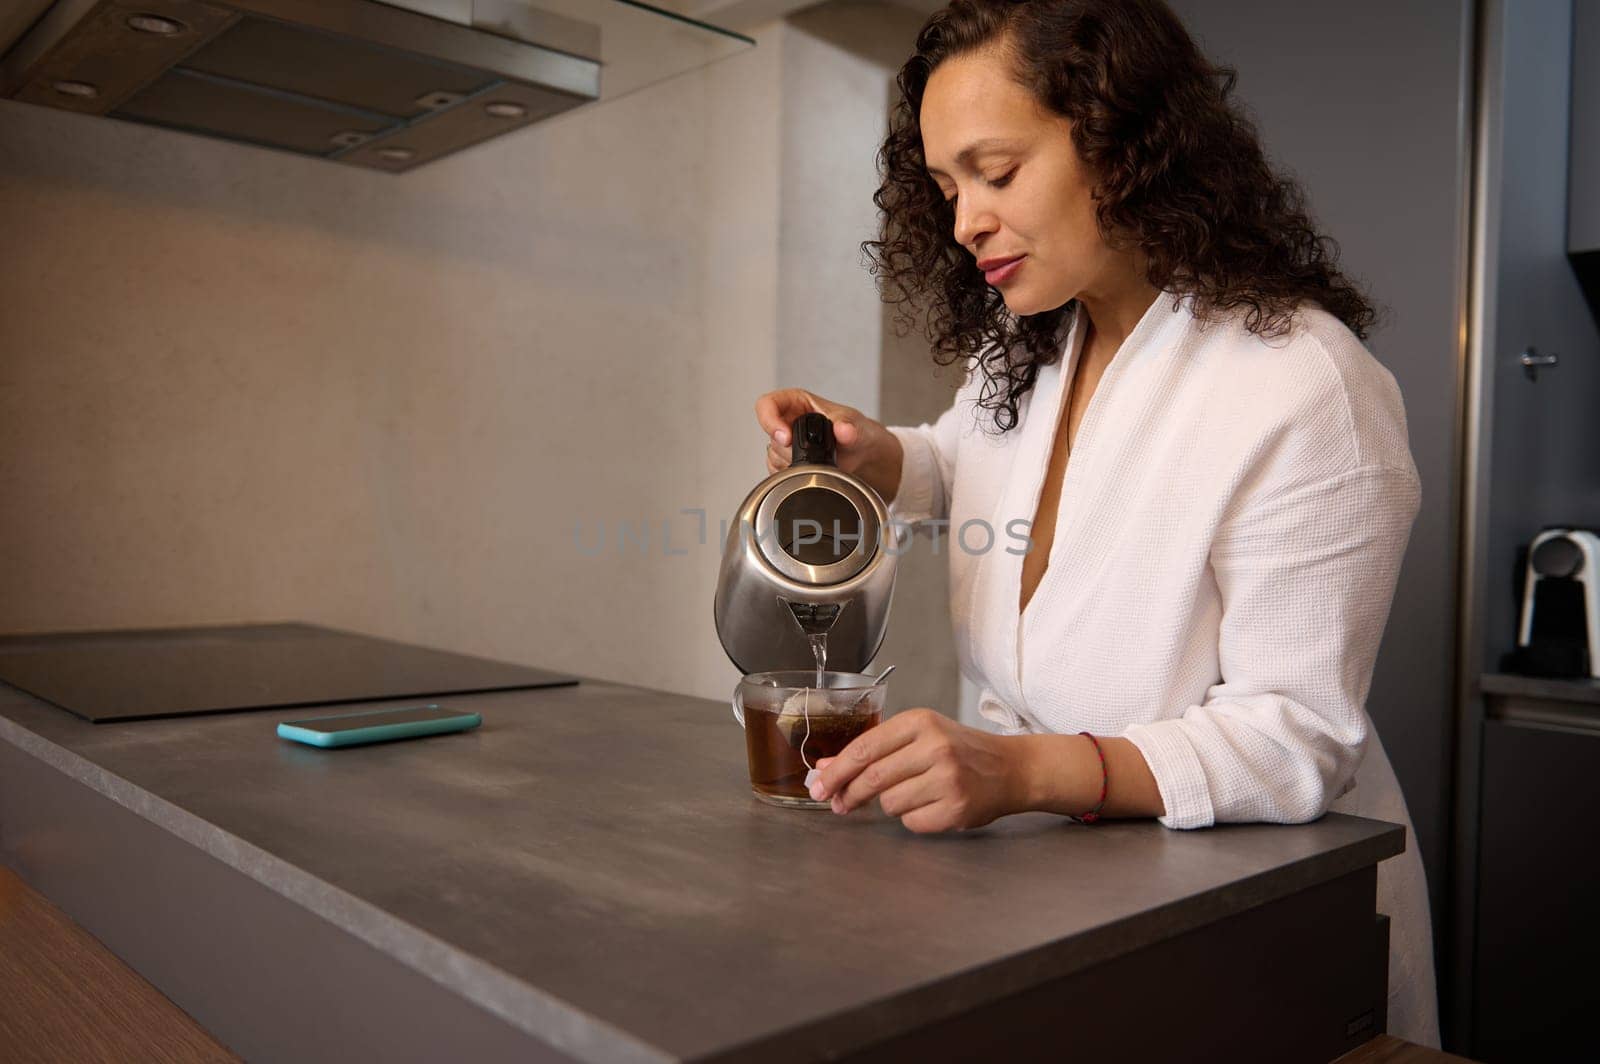 Young curly haired multi ethnic brunette woman making tea for breakfast. Attractive lady on white bathrobe pouring boiled water from an electric teapot into a glass with teabag